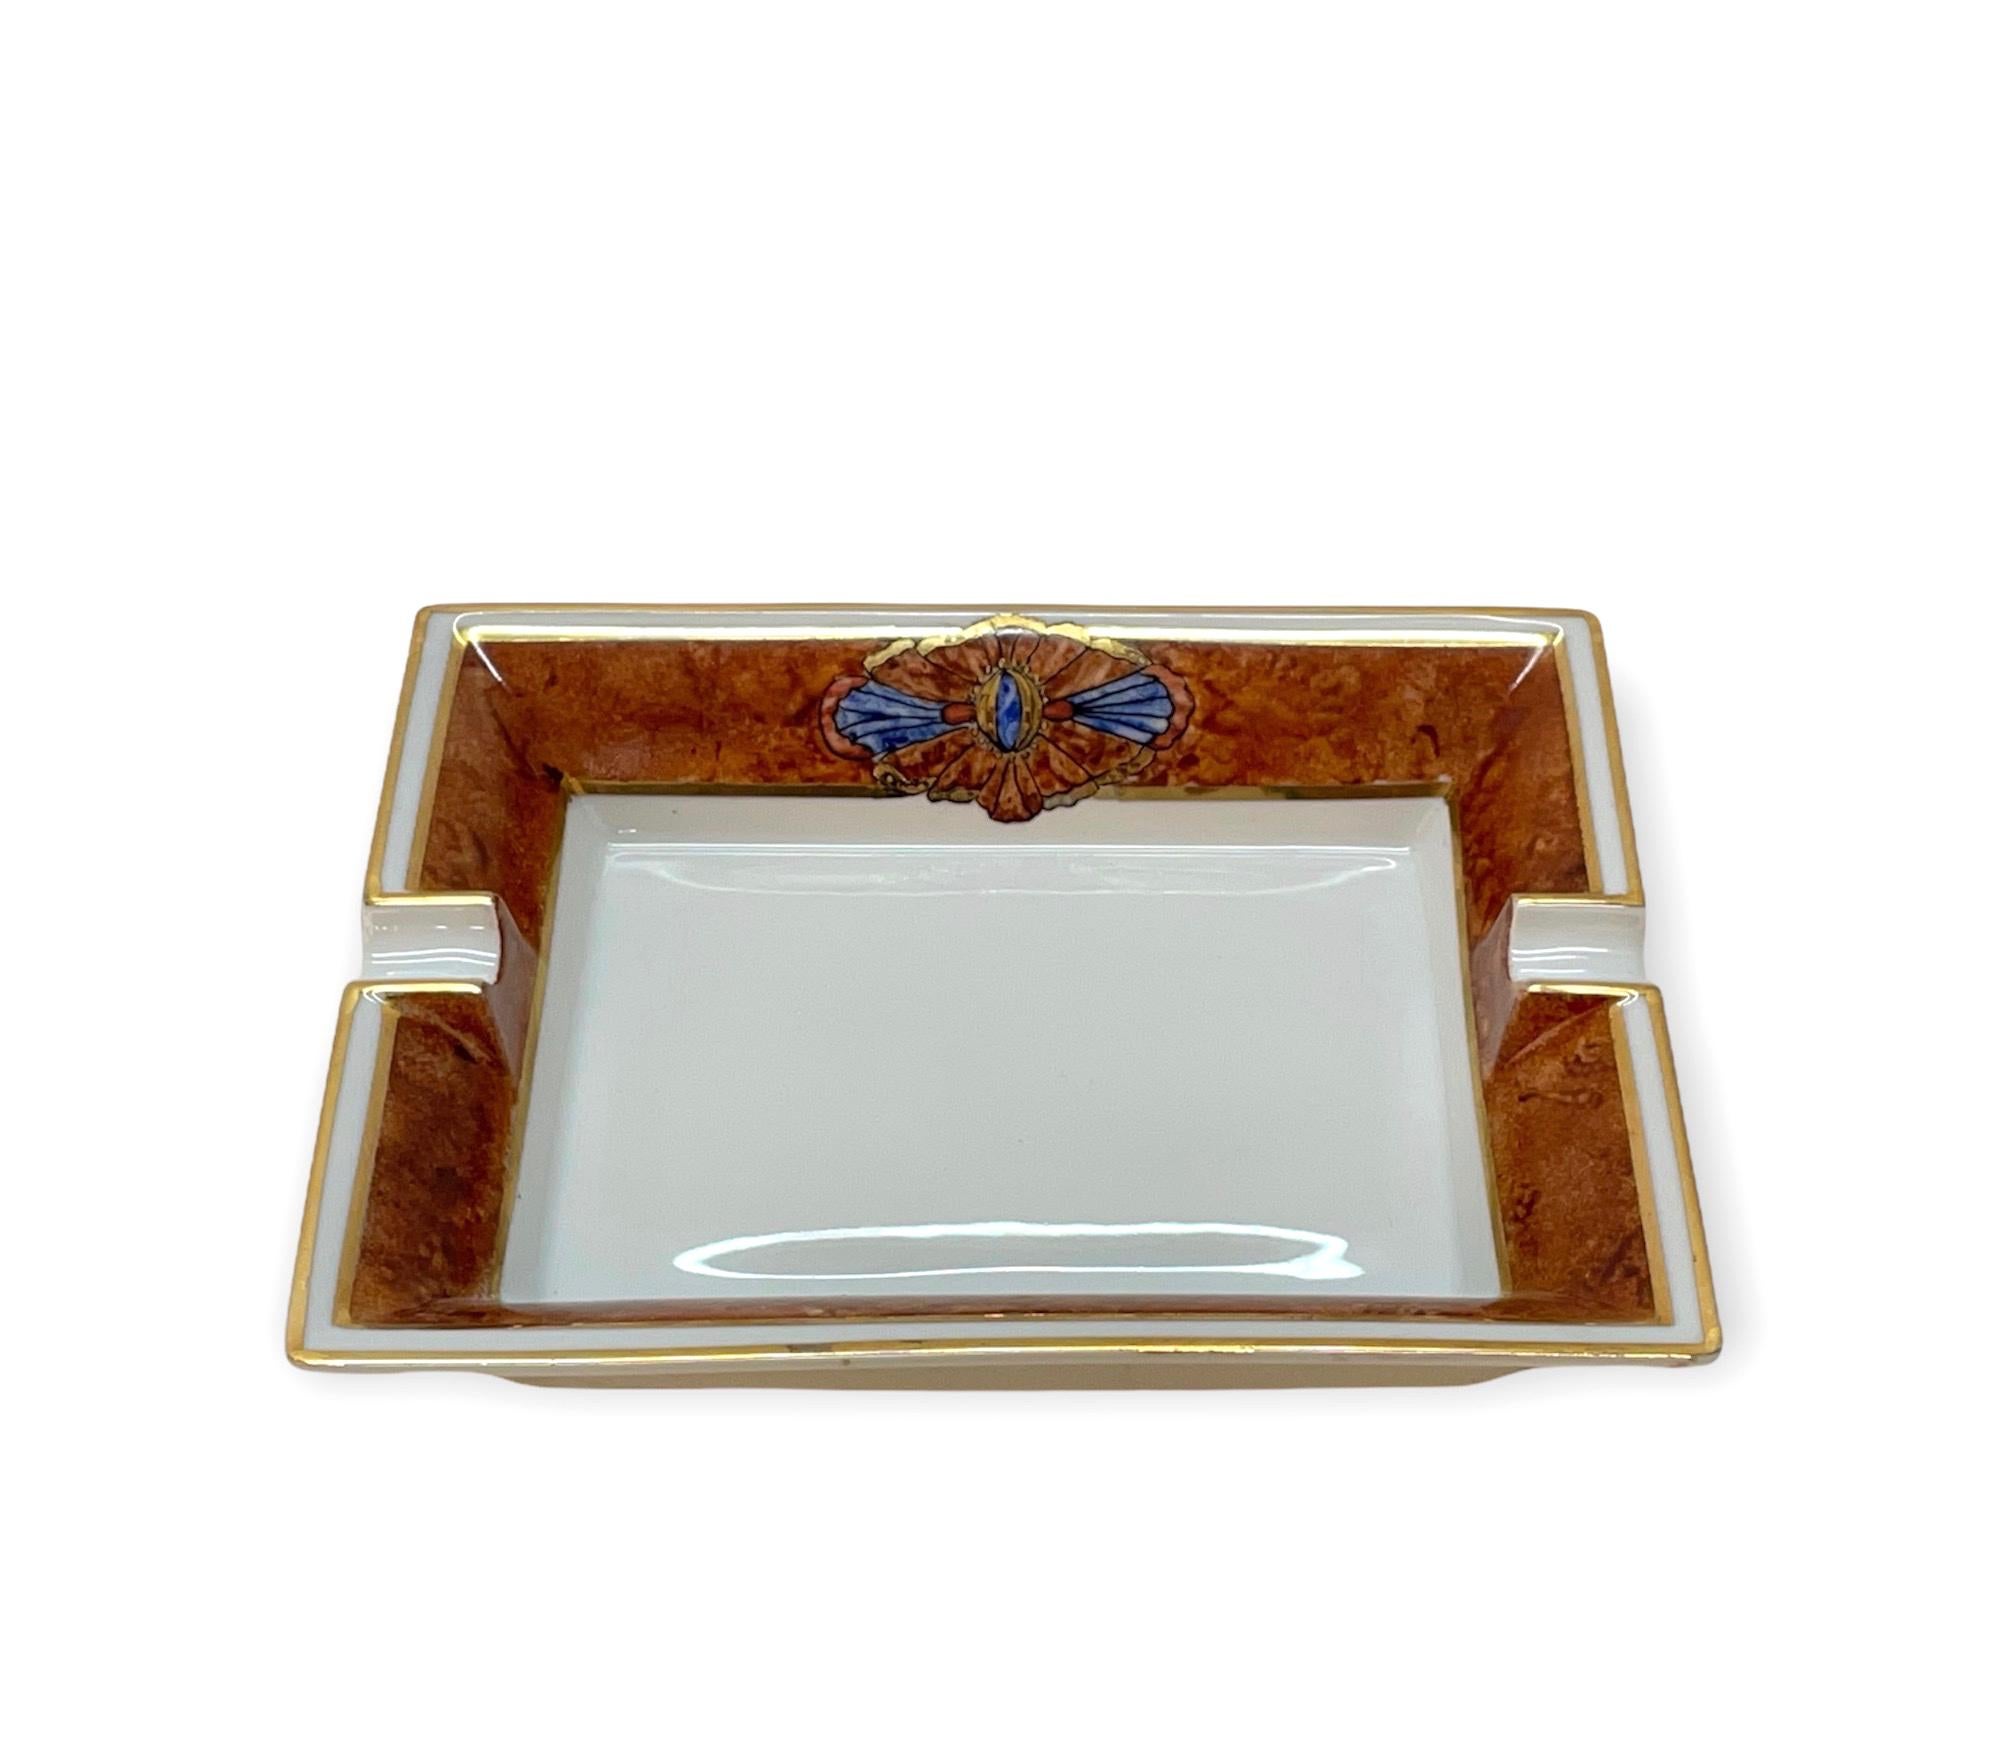 Limoges Midcentury Hand-Painted by Cevoli White Porcelain French Ashtray, 1980s For Sale 3